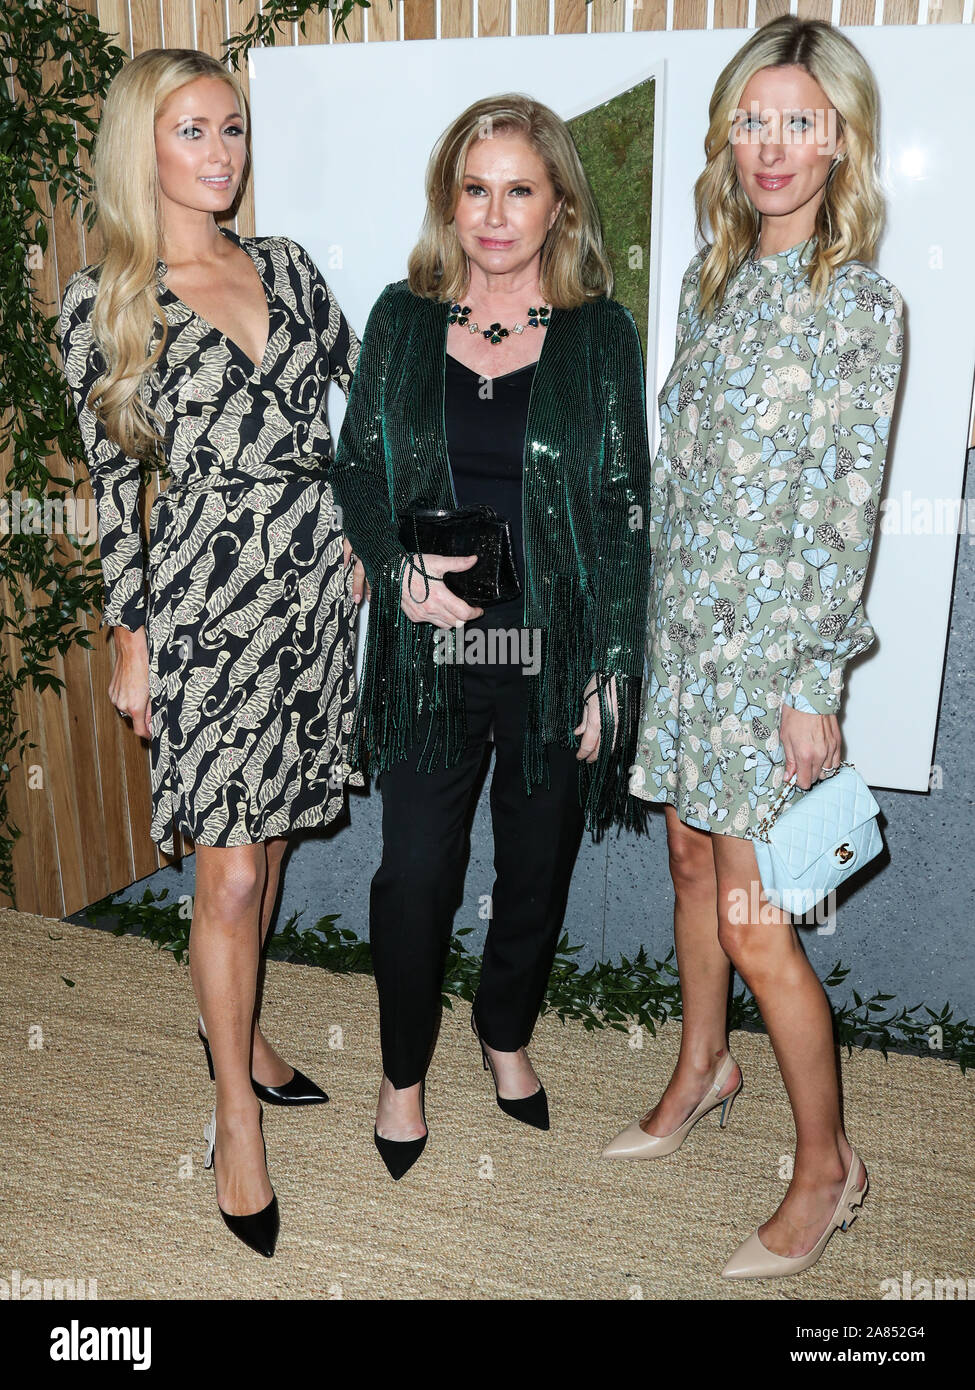 WEST HOLLYWOOD, LOS ANGELES, CALIFORNIA, USA - NOVEMBER 05: Paris Hilton, Kathy Hilton and Nicky Hilton Rothschild arrive at the 1 Hotel West Hollywood Grand Opening Event held at 1 Hotel West Hollywood on November 5, 2019 in West Hollywood, Los Angeles, California, United States. (Photo by Xavier Collin/Image Press Agency) Stock Photo